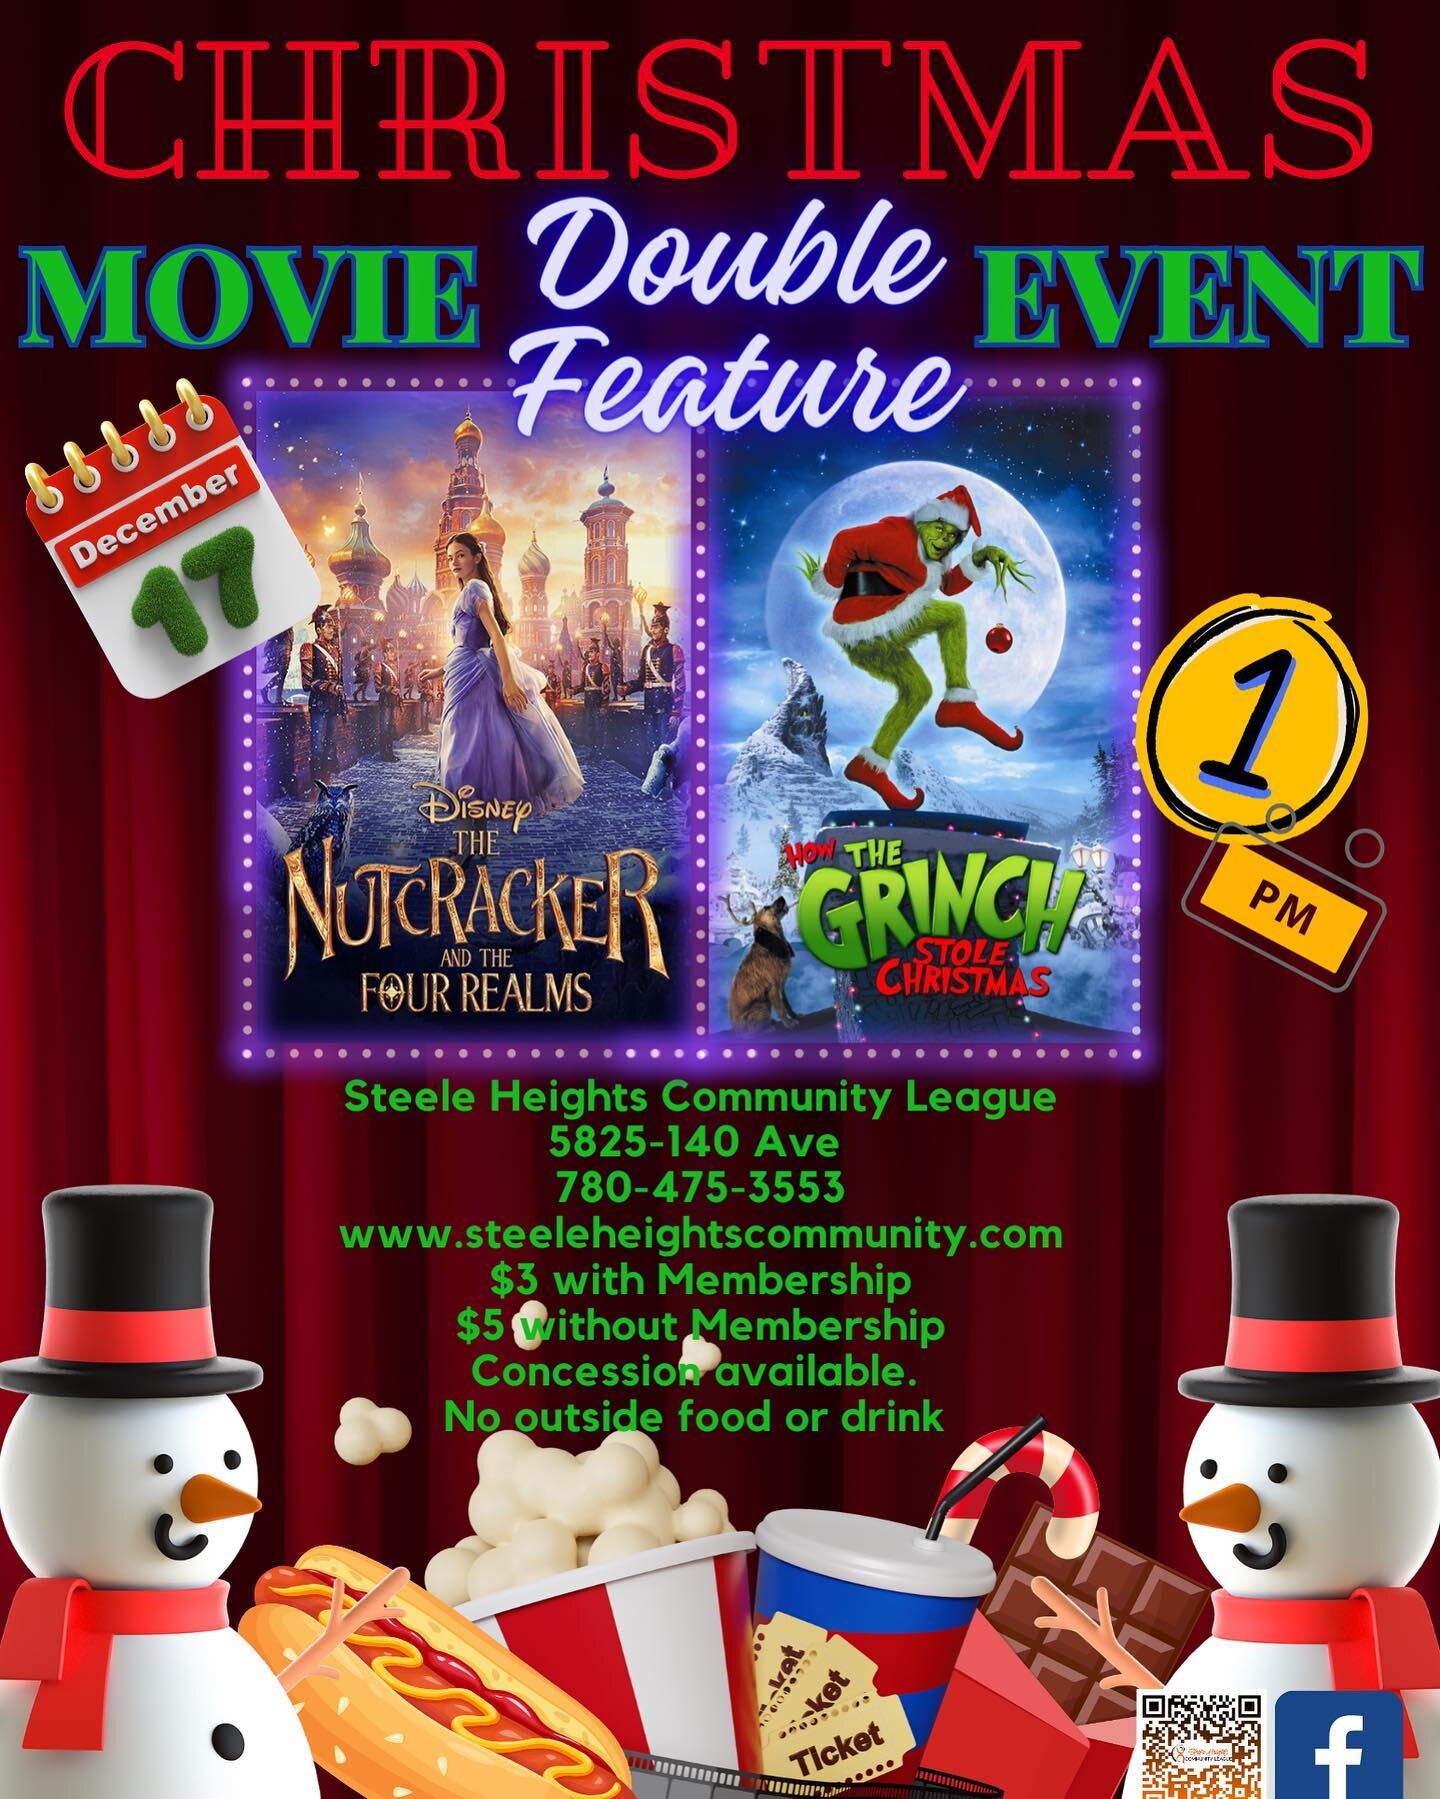 Let&rsquo;s go!!!! Tomorrow will be a fun filled day with our Double Feature Movie event. Full concession available. Crafts in between features. Bring your own lawn chair or blanket. It&rsquo;s going to be a blast !